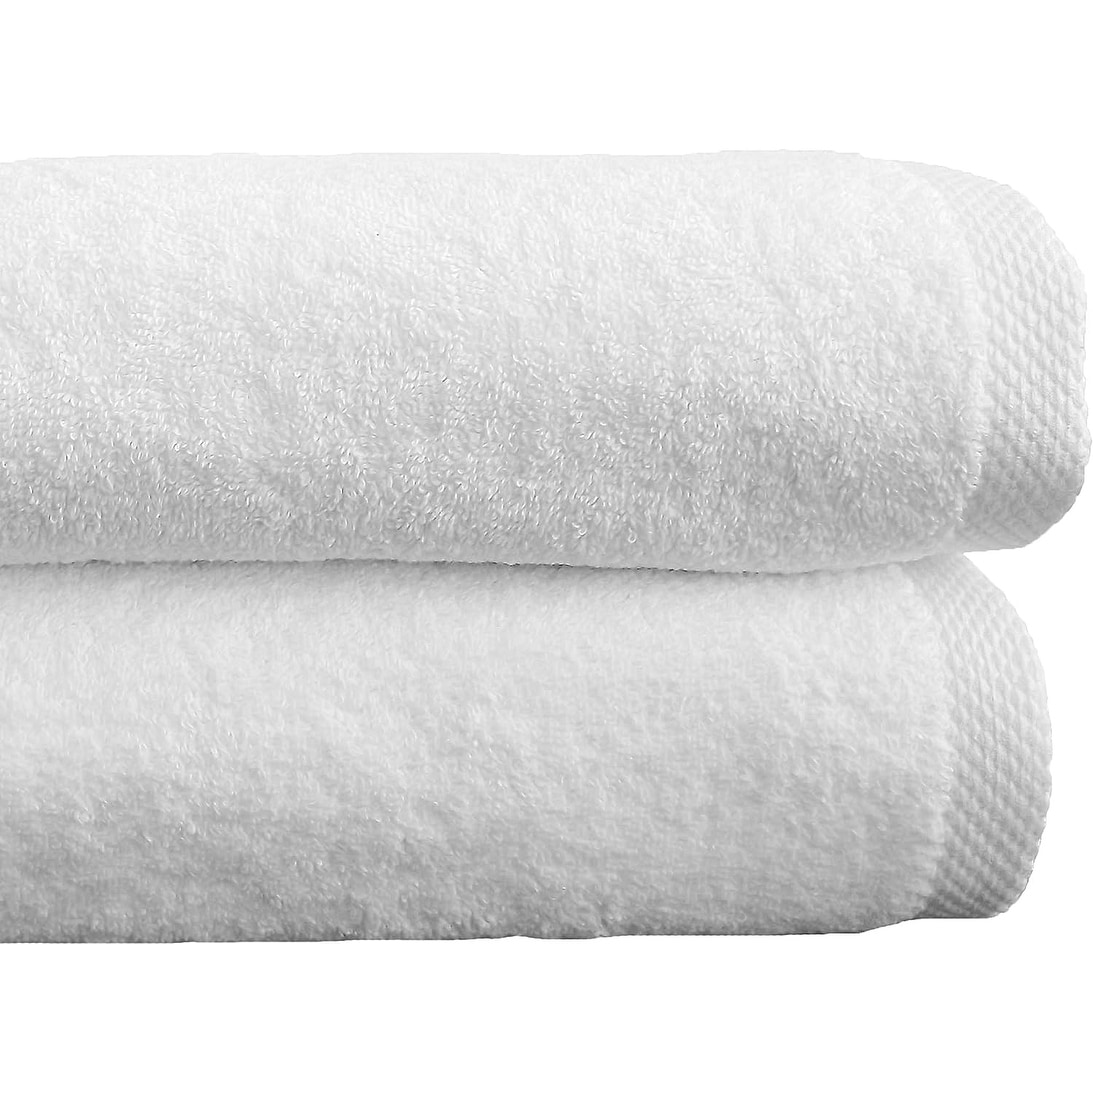 AR LINENS Oversized Bath Towels, 100% Cotton 30x60 Clearance Set of  Oversize Bath Towel Sheets, Soft Absorbent Large Towels for Bathroom, Pool,  Hotel